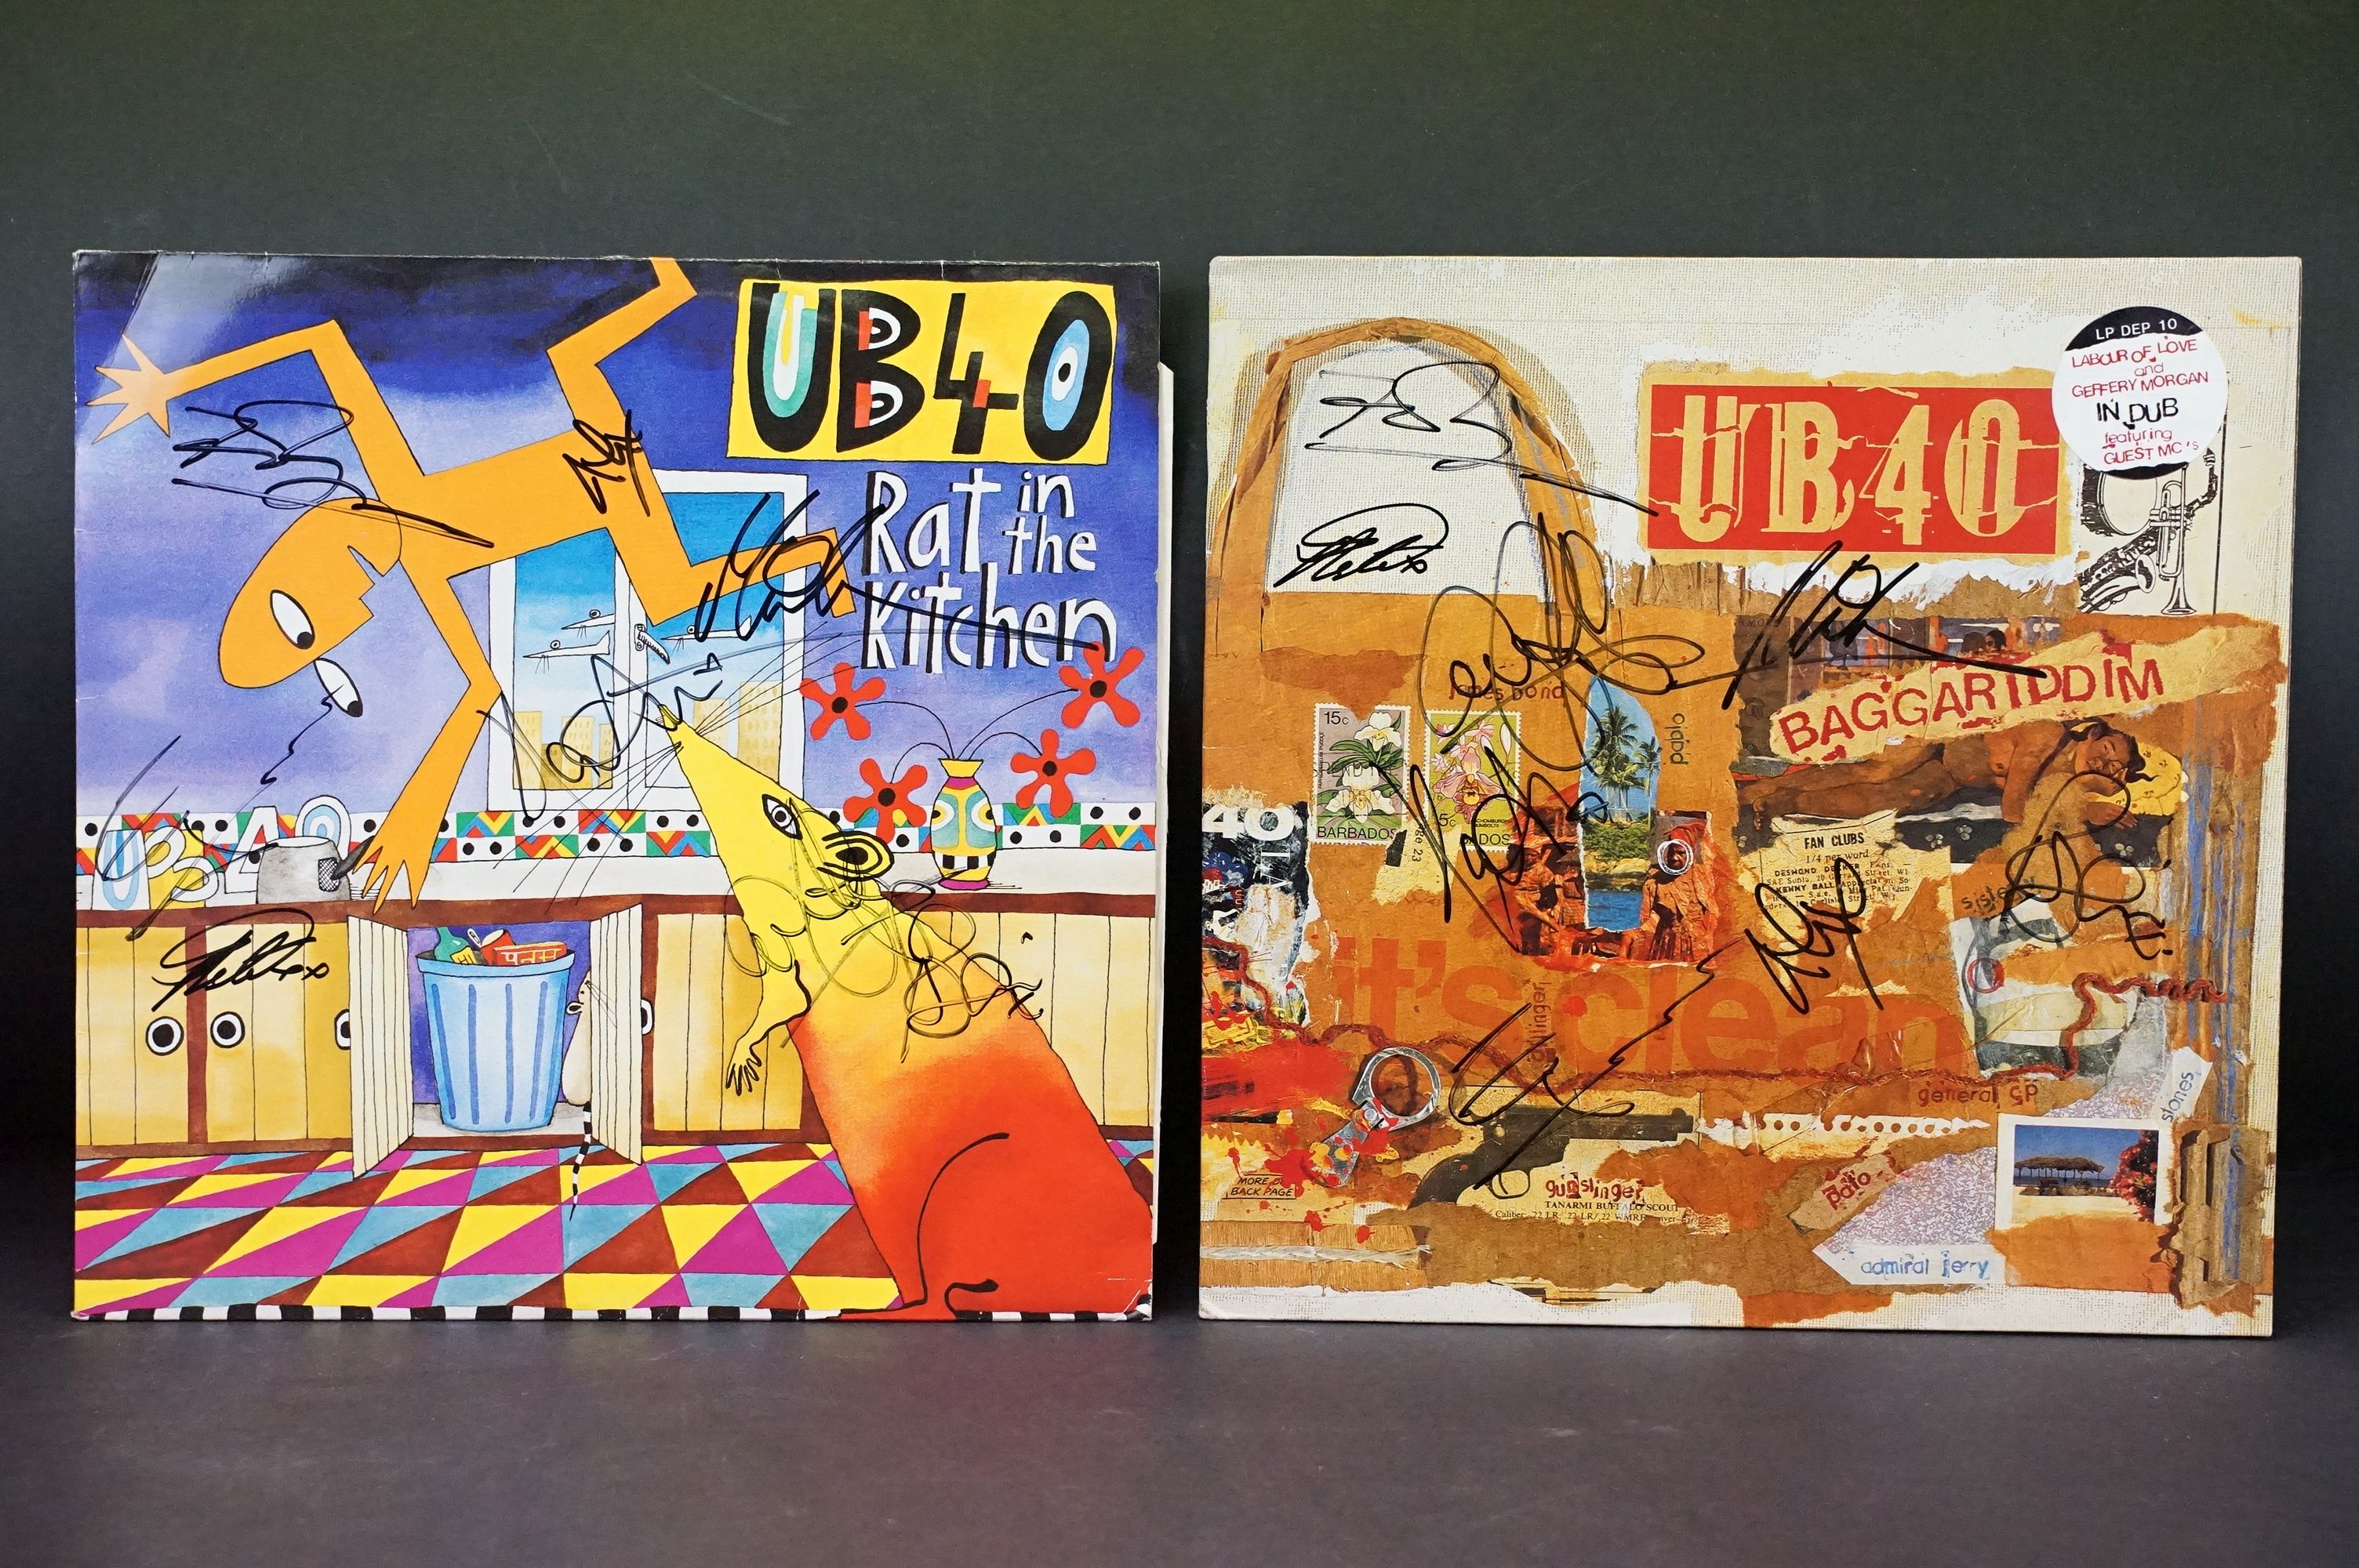 Vinyl / Autograph - 2 fully signed UB40 albums. Condition VG overall